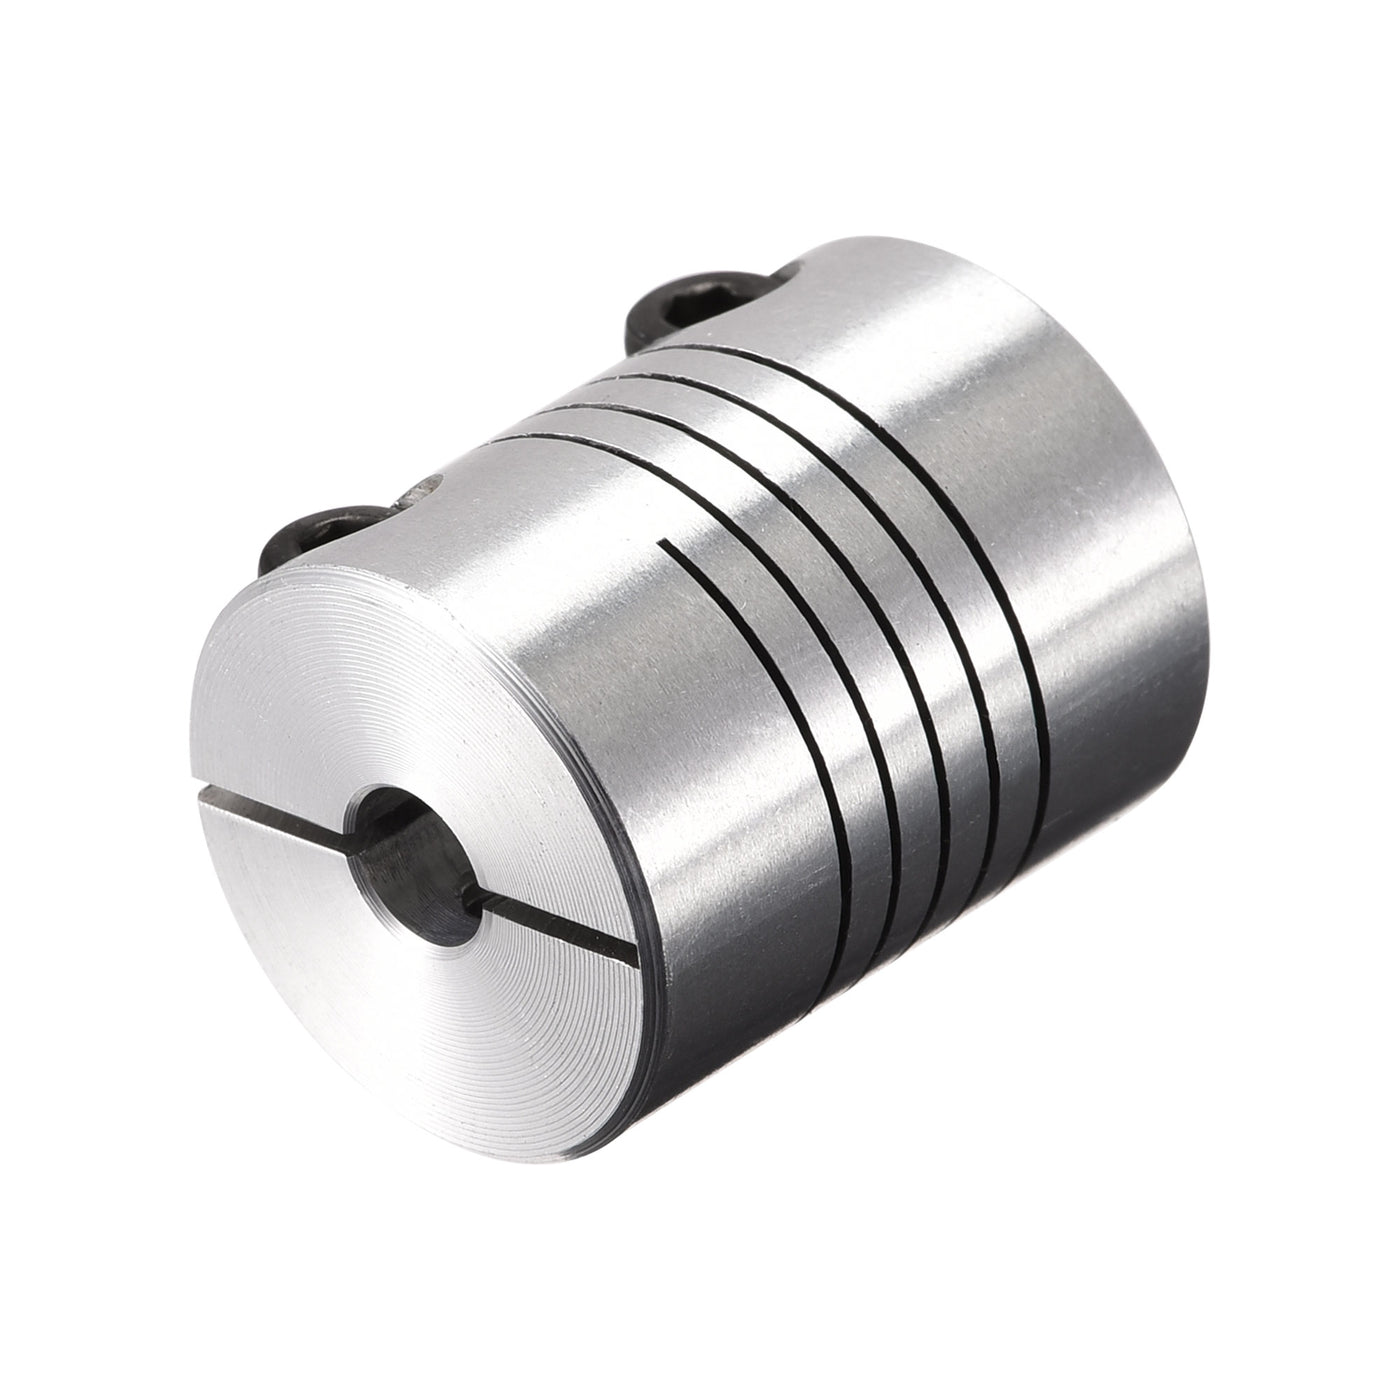 uxcell Uxcell 2PCS Motor Shaft 5mm to 5mm Helical Beam Coupler Coupling 20mm Dia 25mm Length